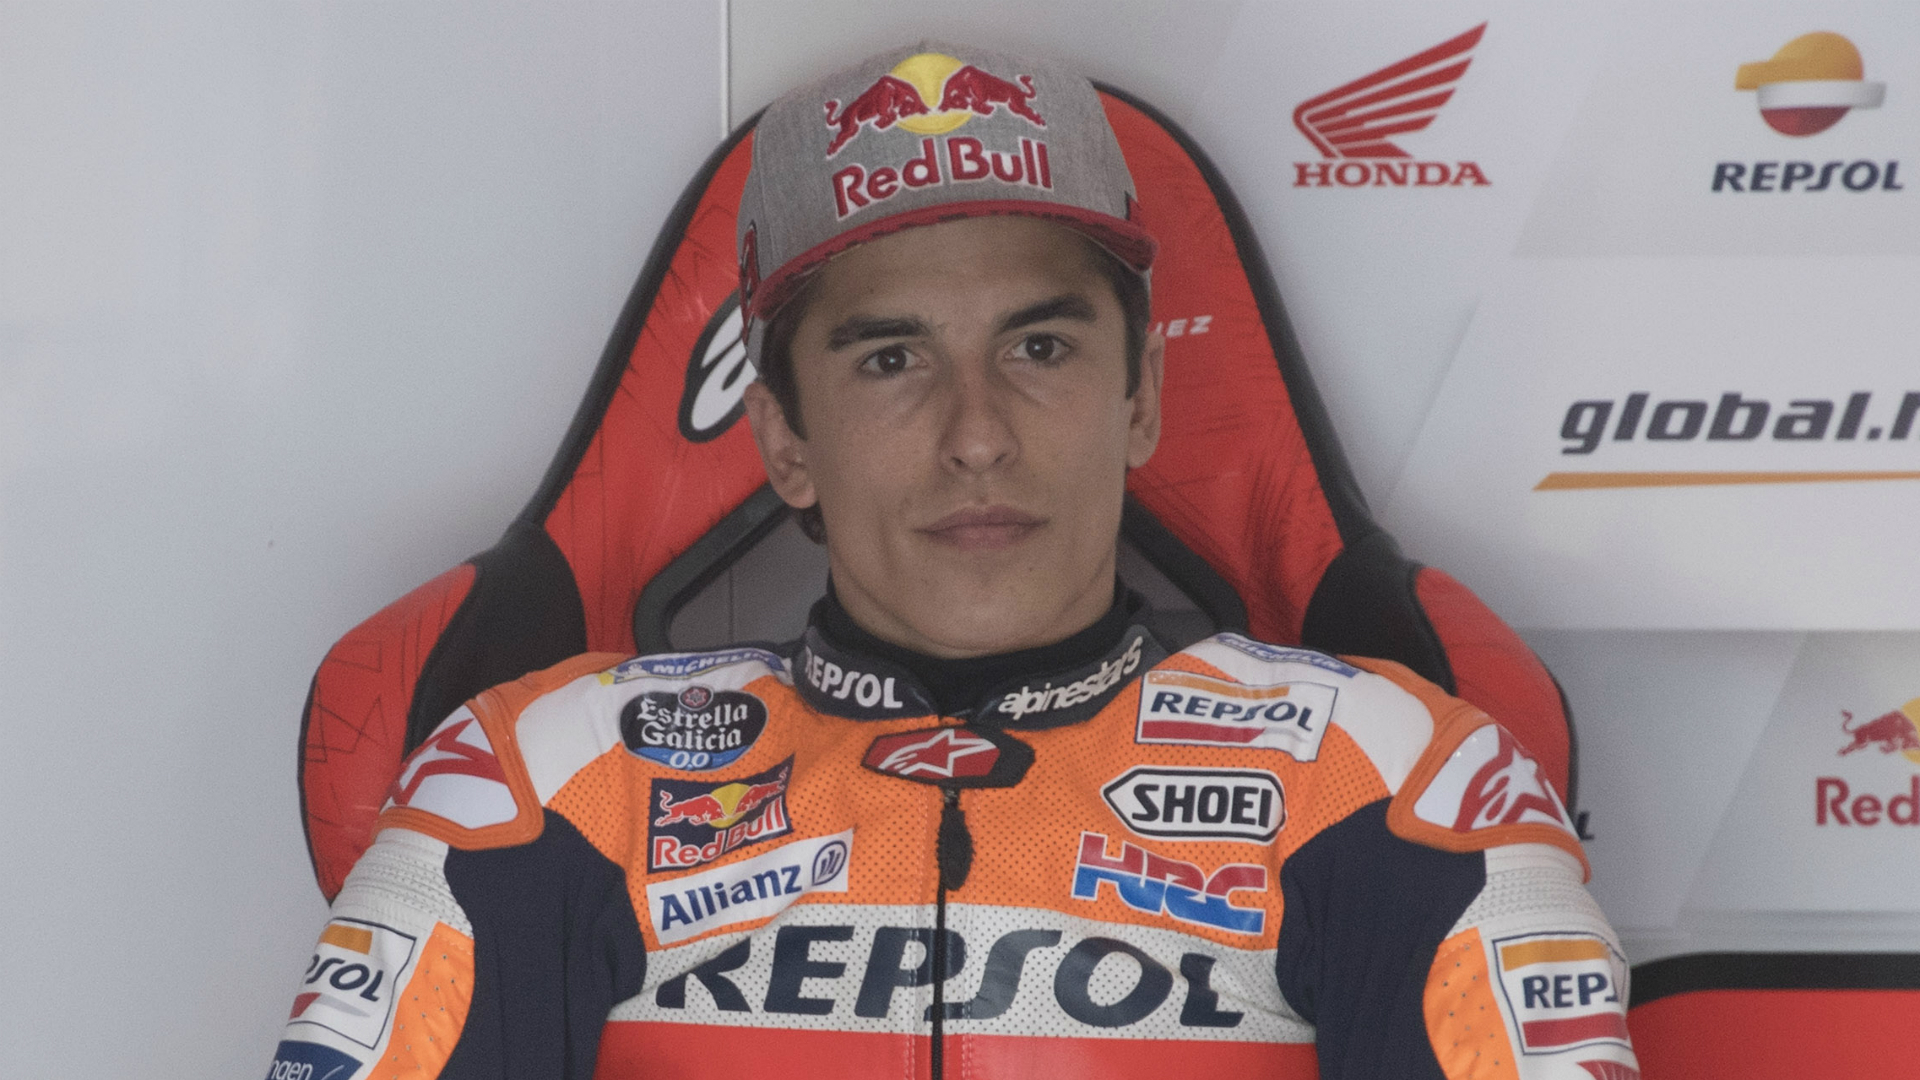 Repsol Honda reportedly may not have the injured Marc Marquez back on a MotoGP grid until the middle of September.